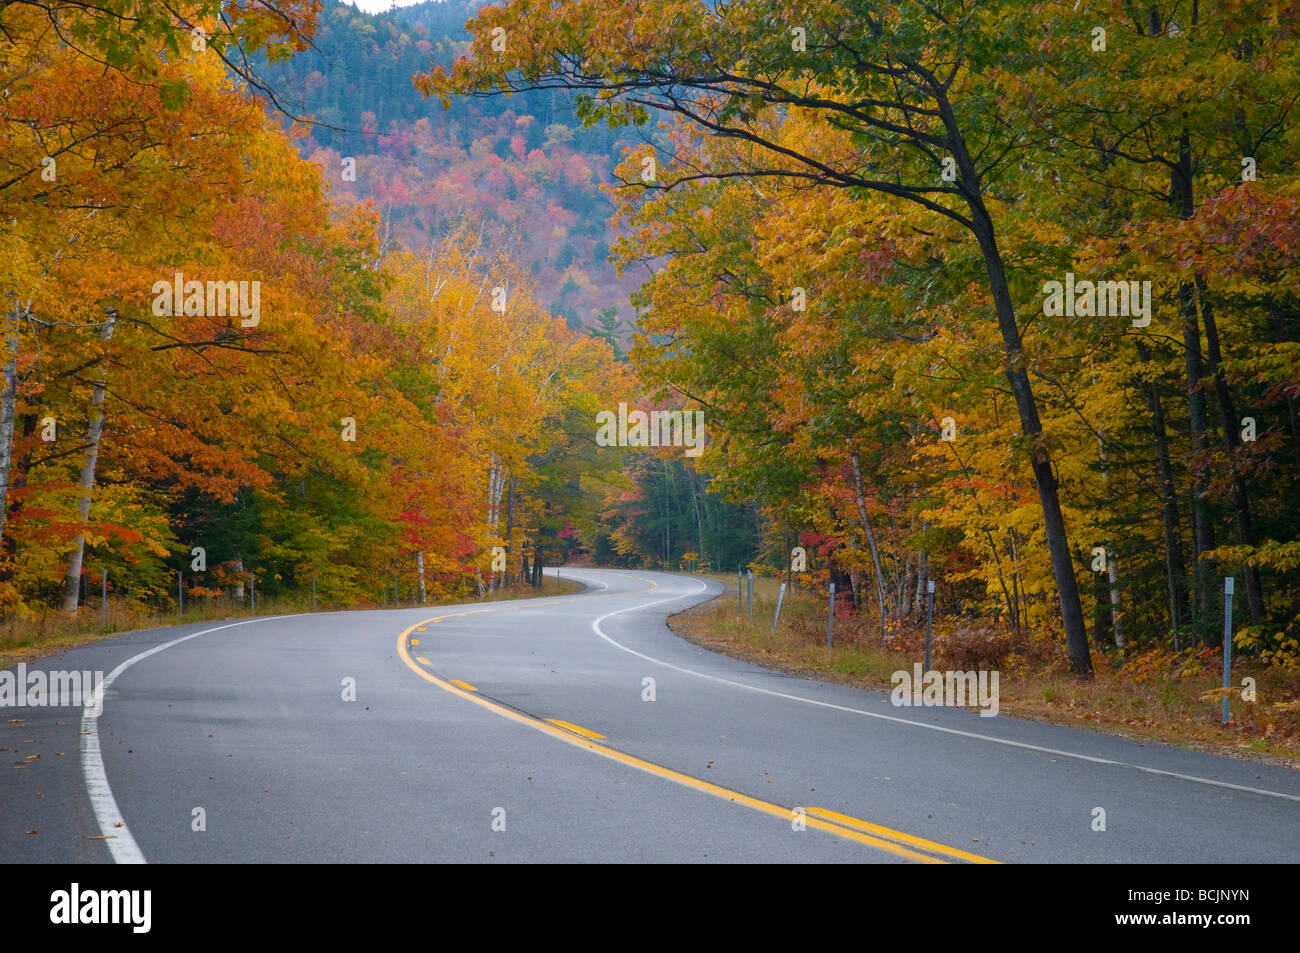 USA, New Hampshire, White Mountain National Park, Kankamagus Highway Banque D'Images